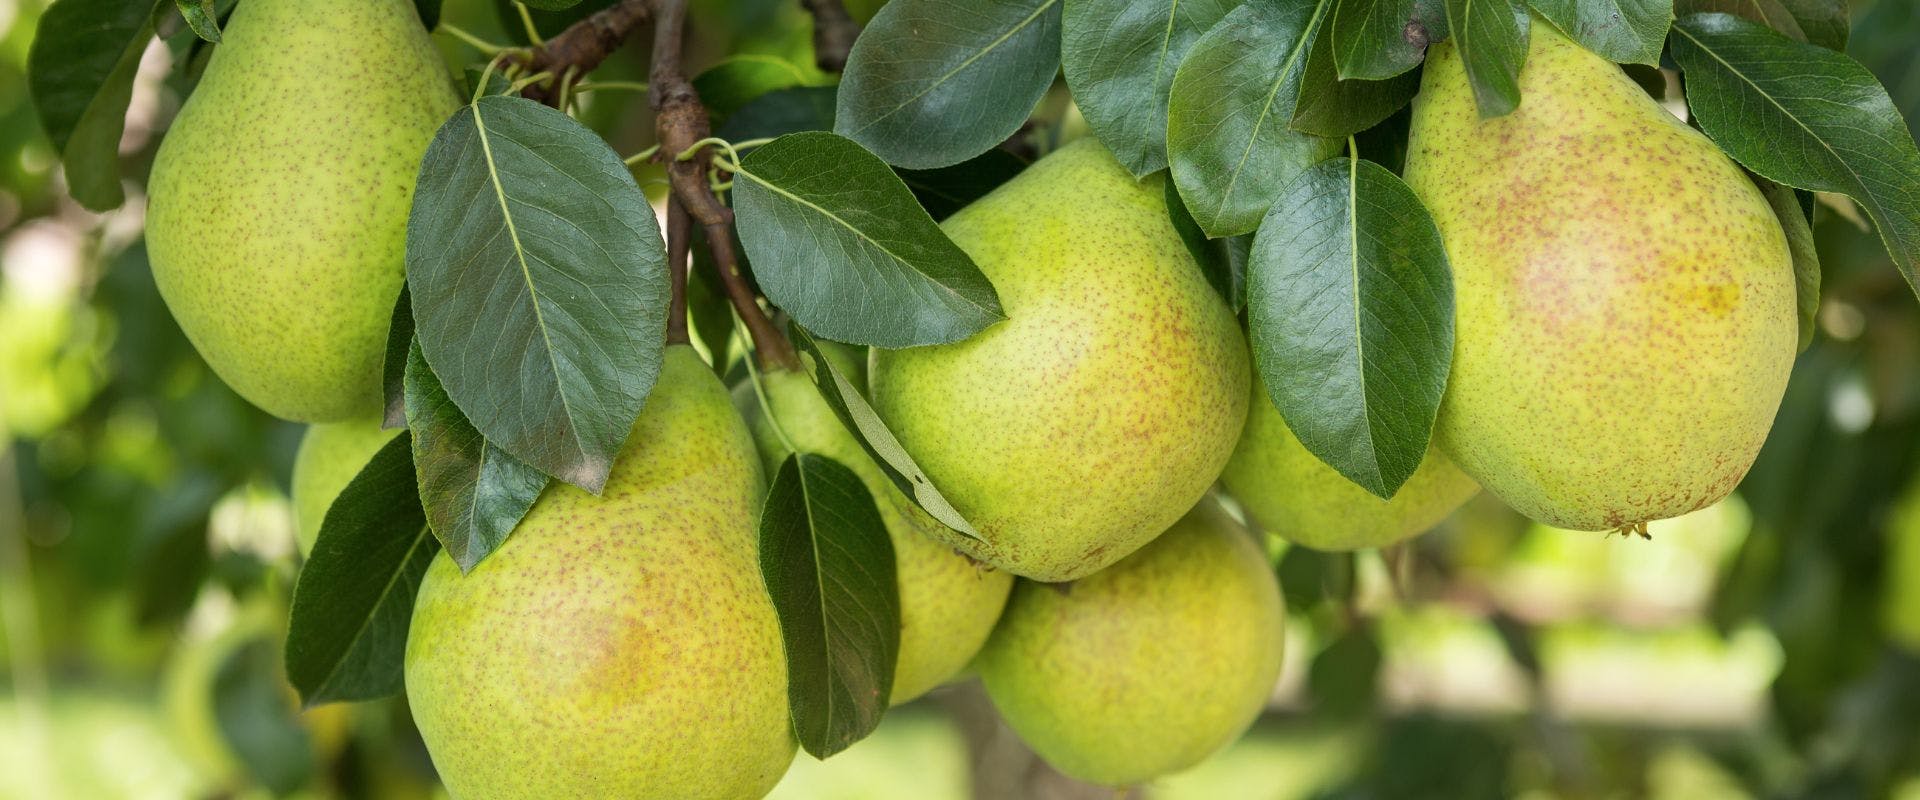 Pears growing from tree